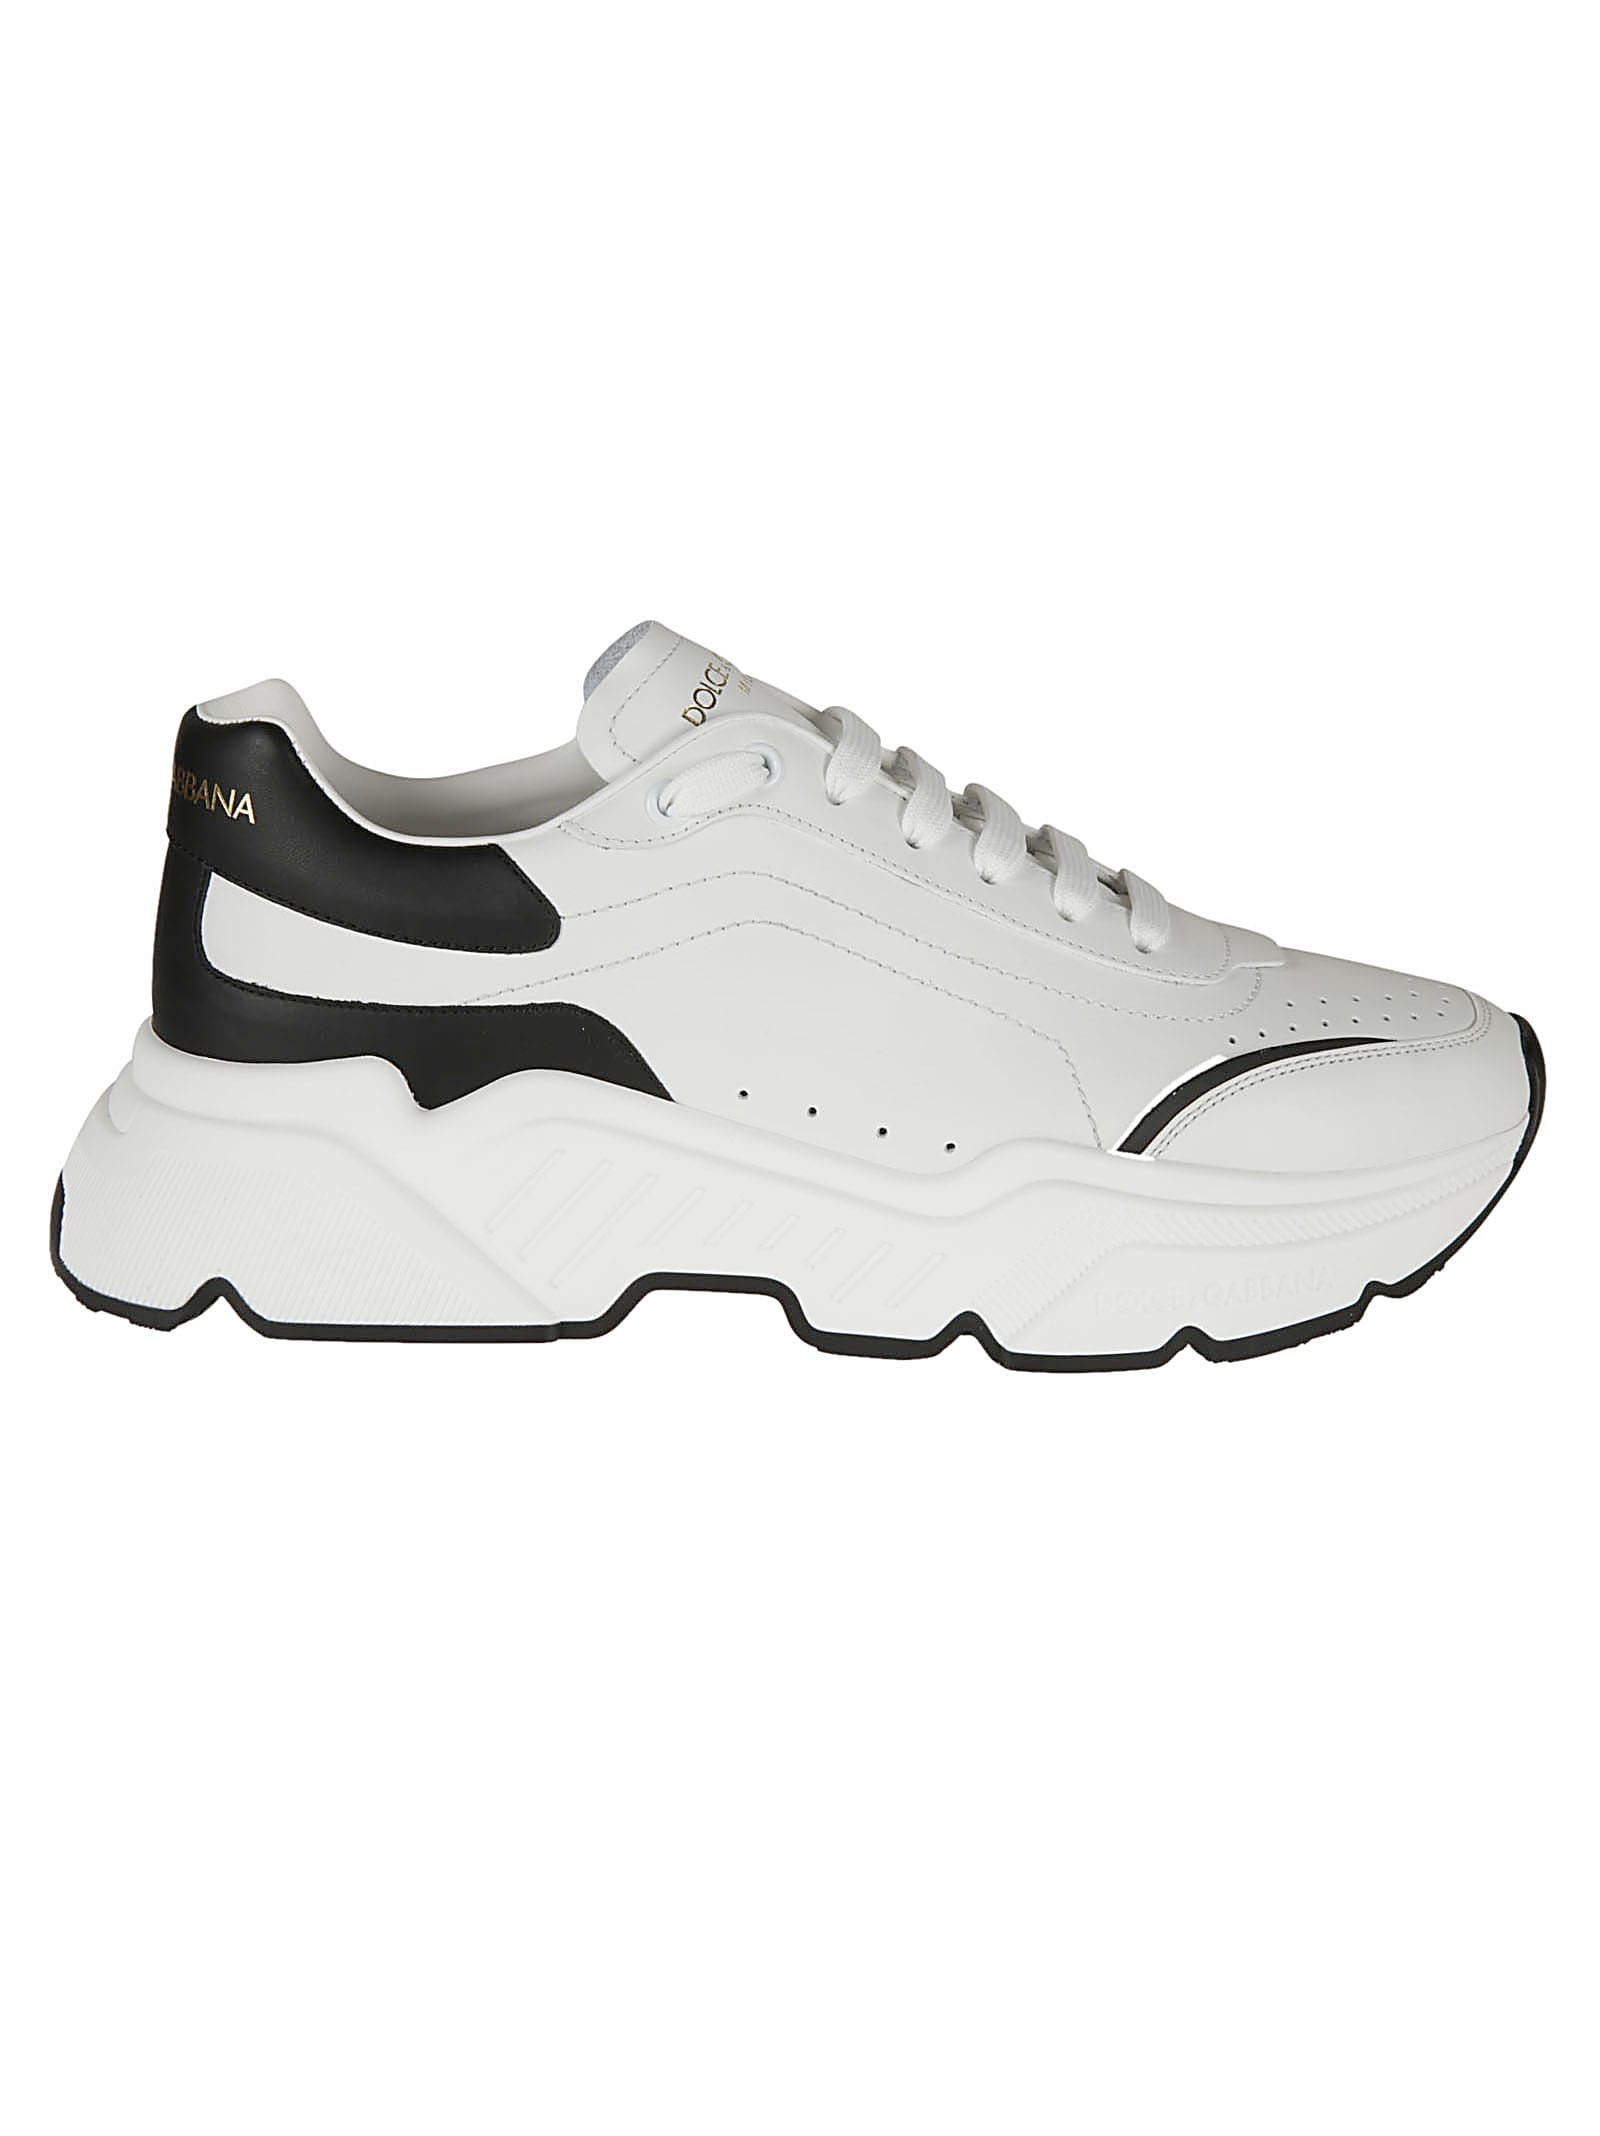 Dolce & Gabbana Dolce And Gabbana White And Black Daymaster Sneakers In